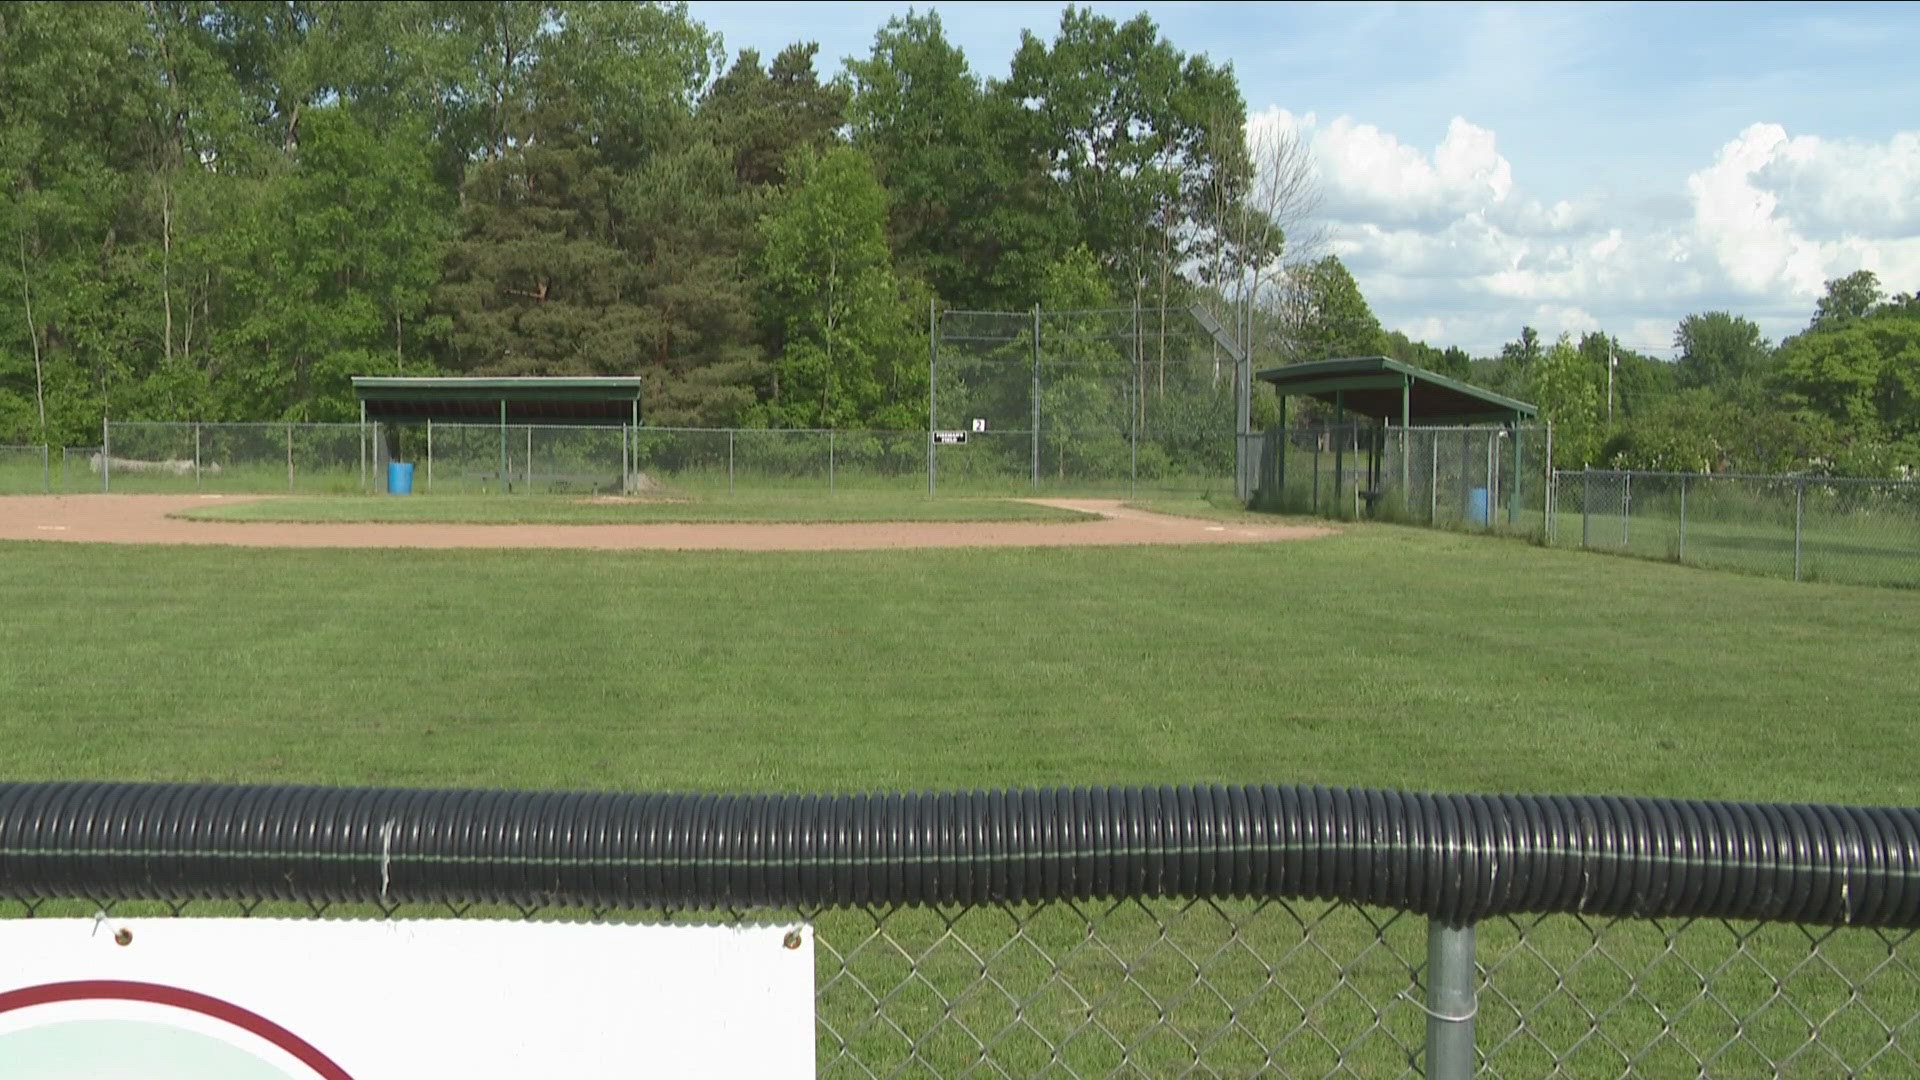 A youth baseball coach was forced to step down after confronting a 7 year old